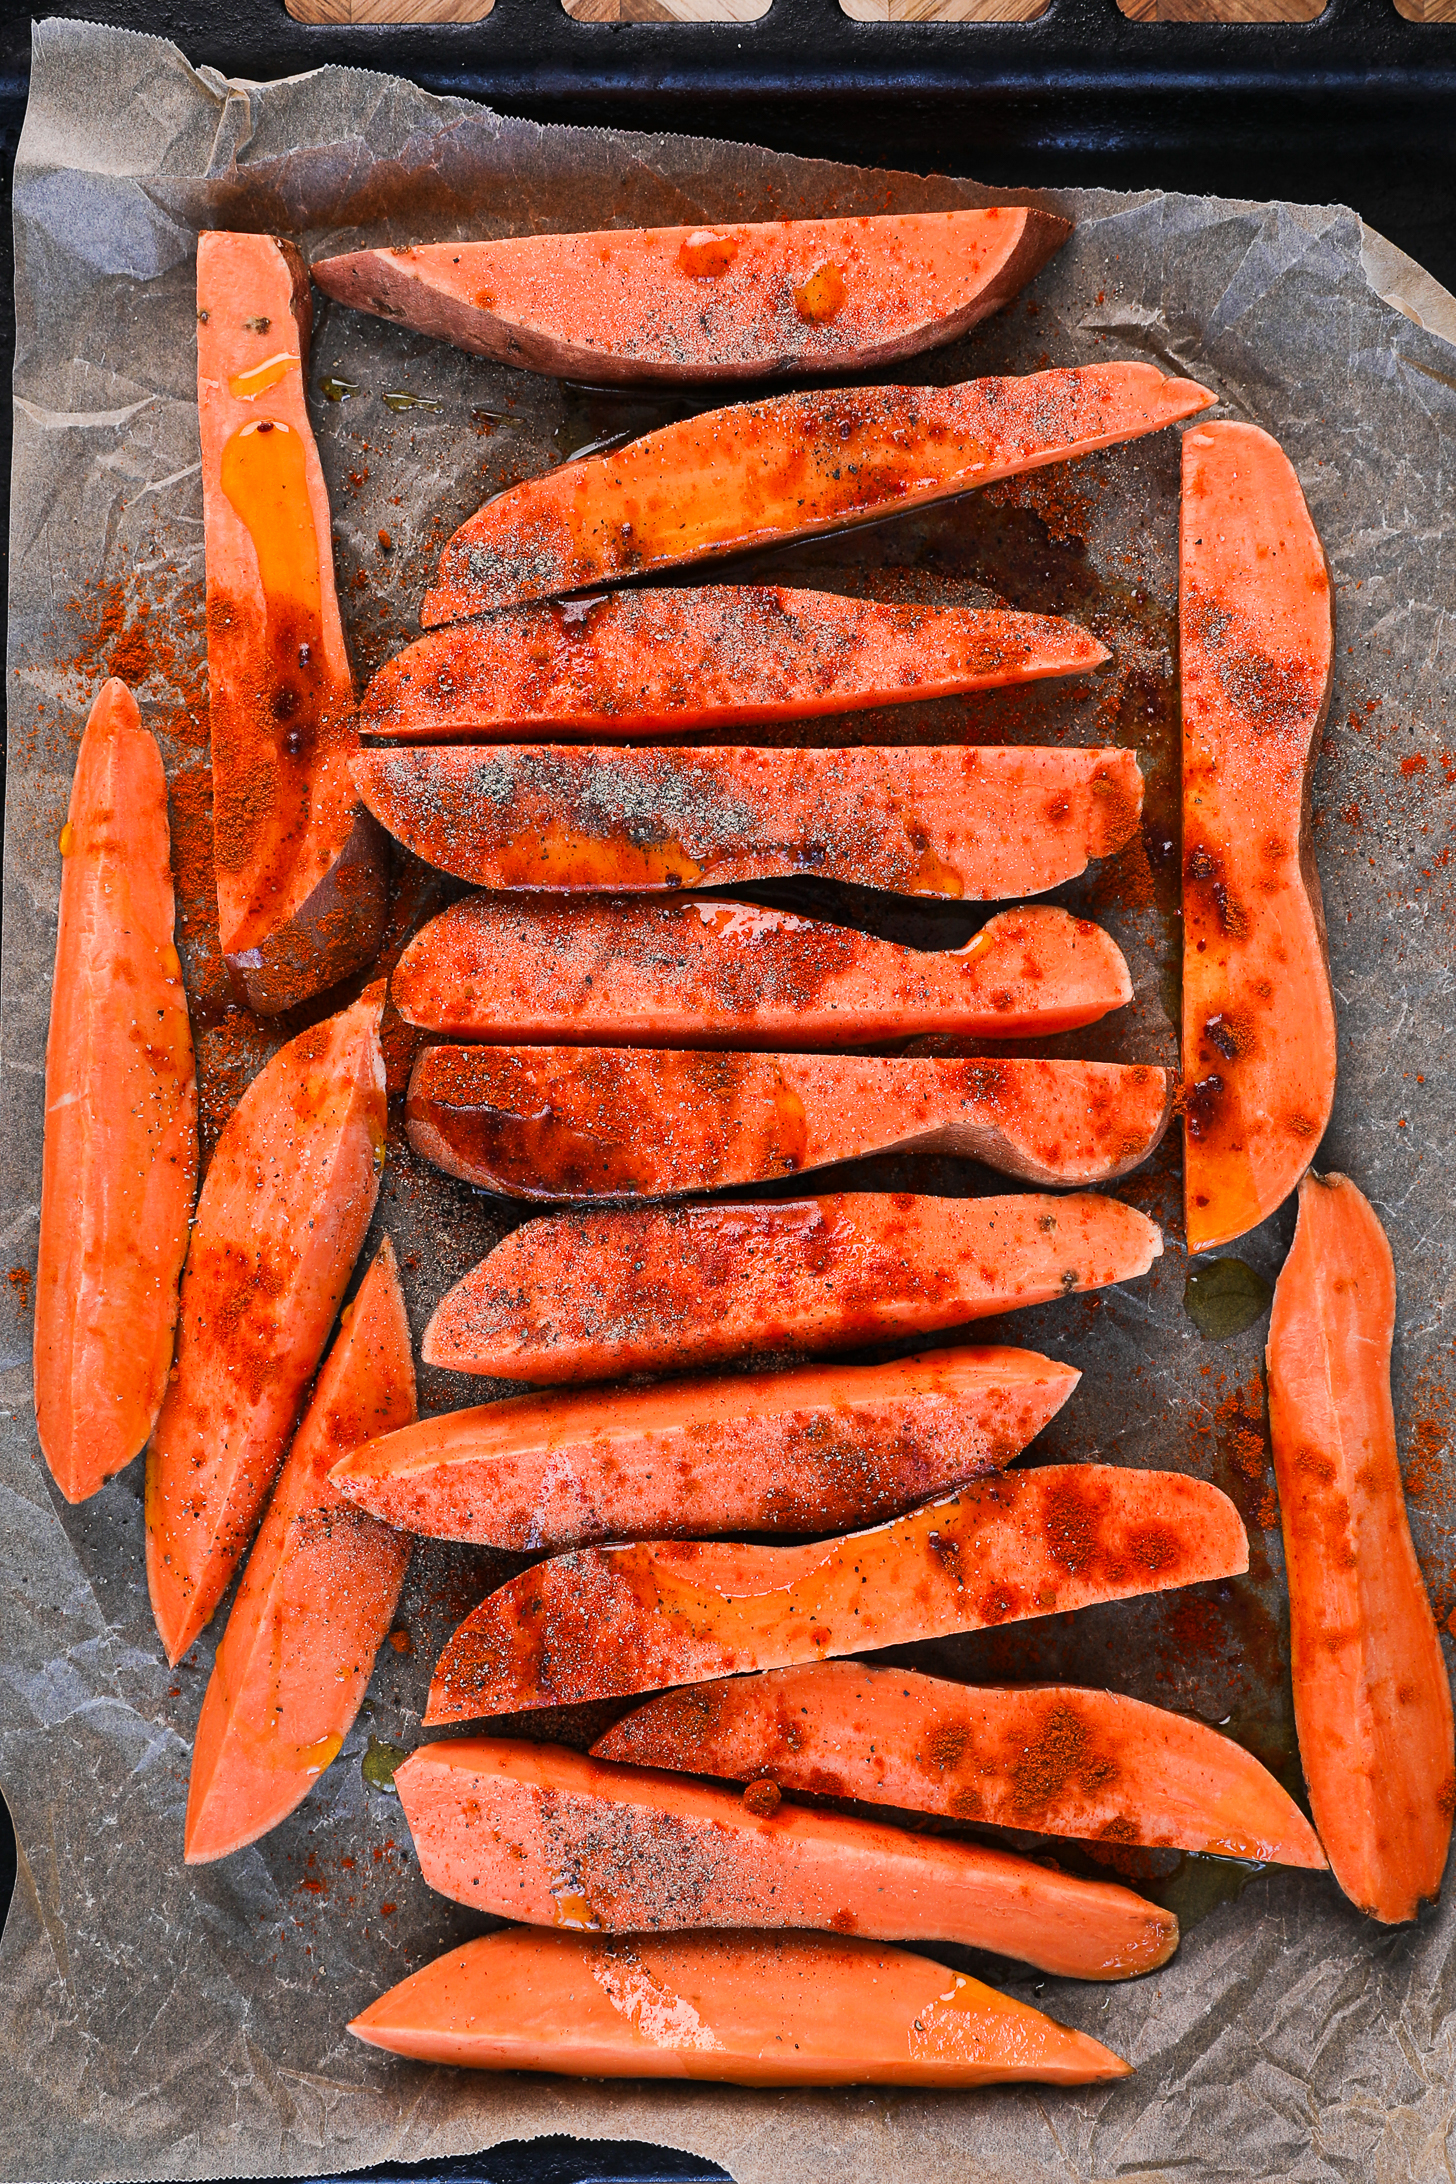 Uncooked sweet potato wedges with oil and powdered spices on top on a lined baking tray.